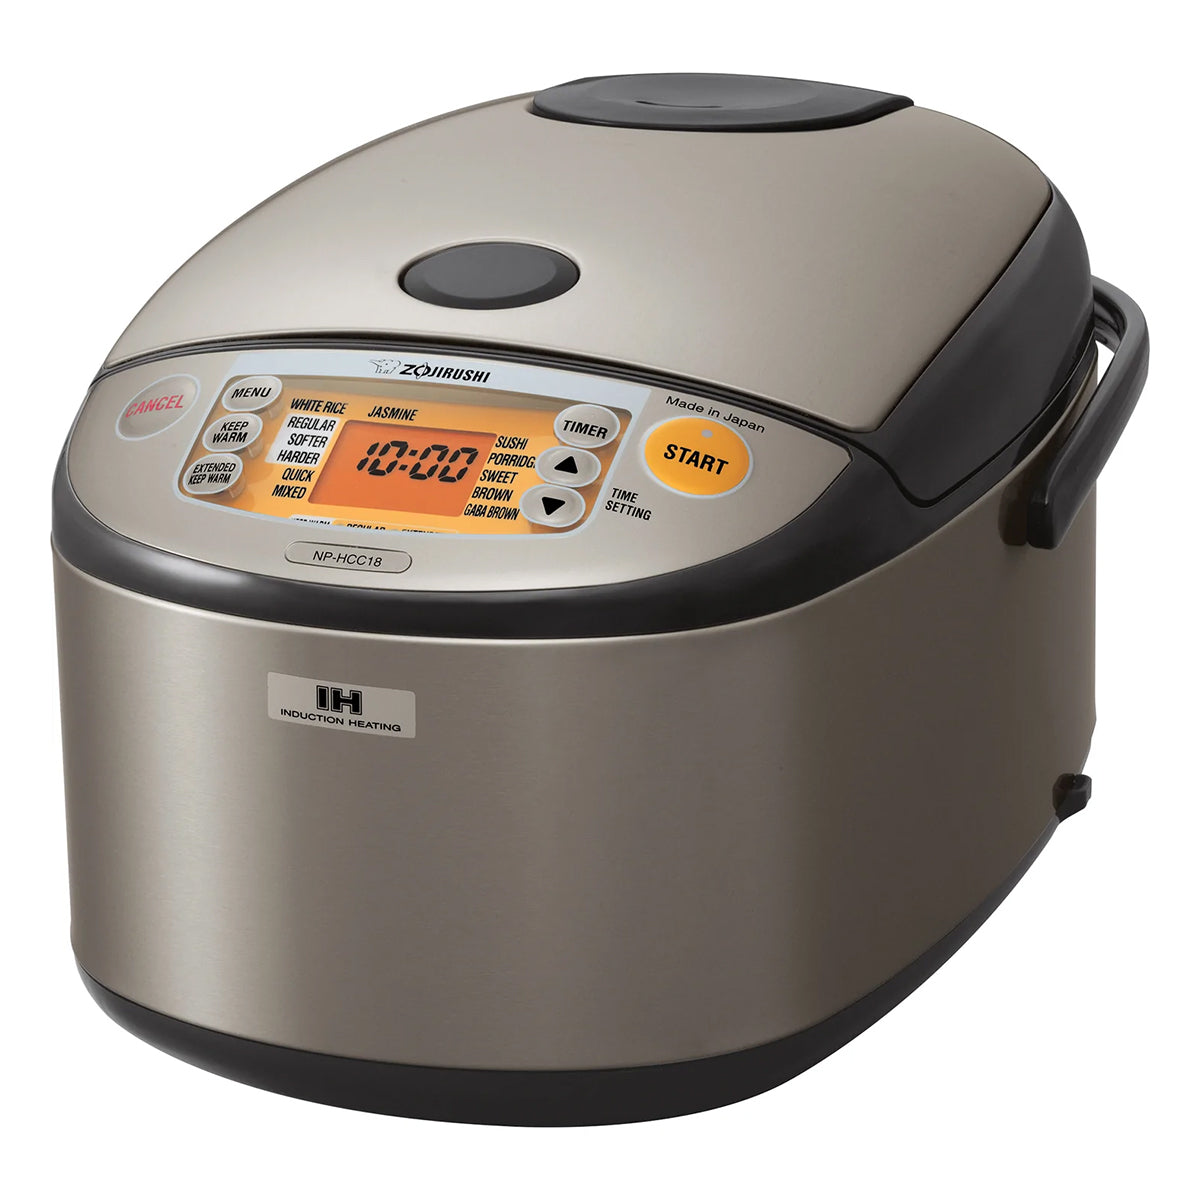 zojirushi induction heating micom 10-cup rice cooker